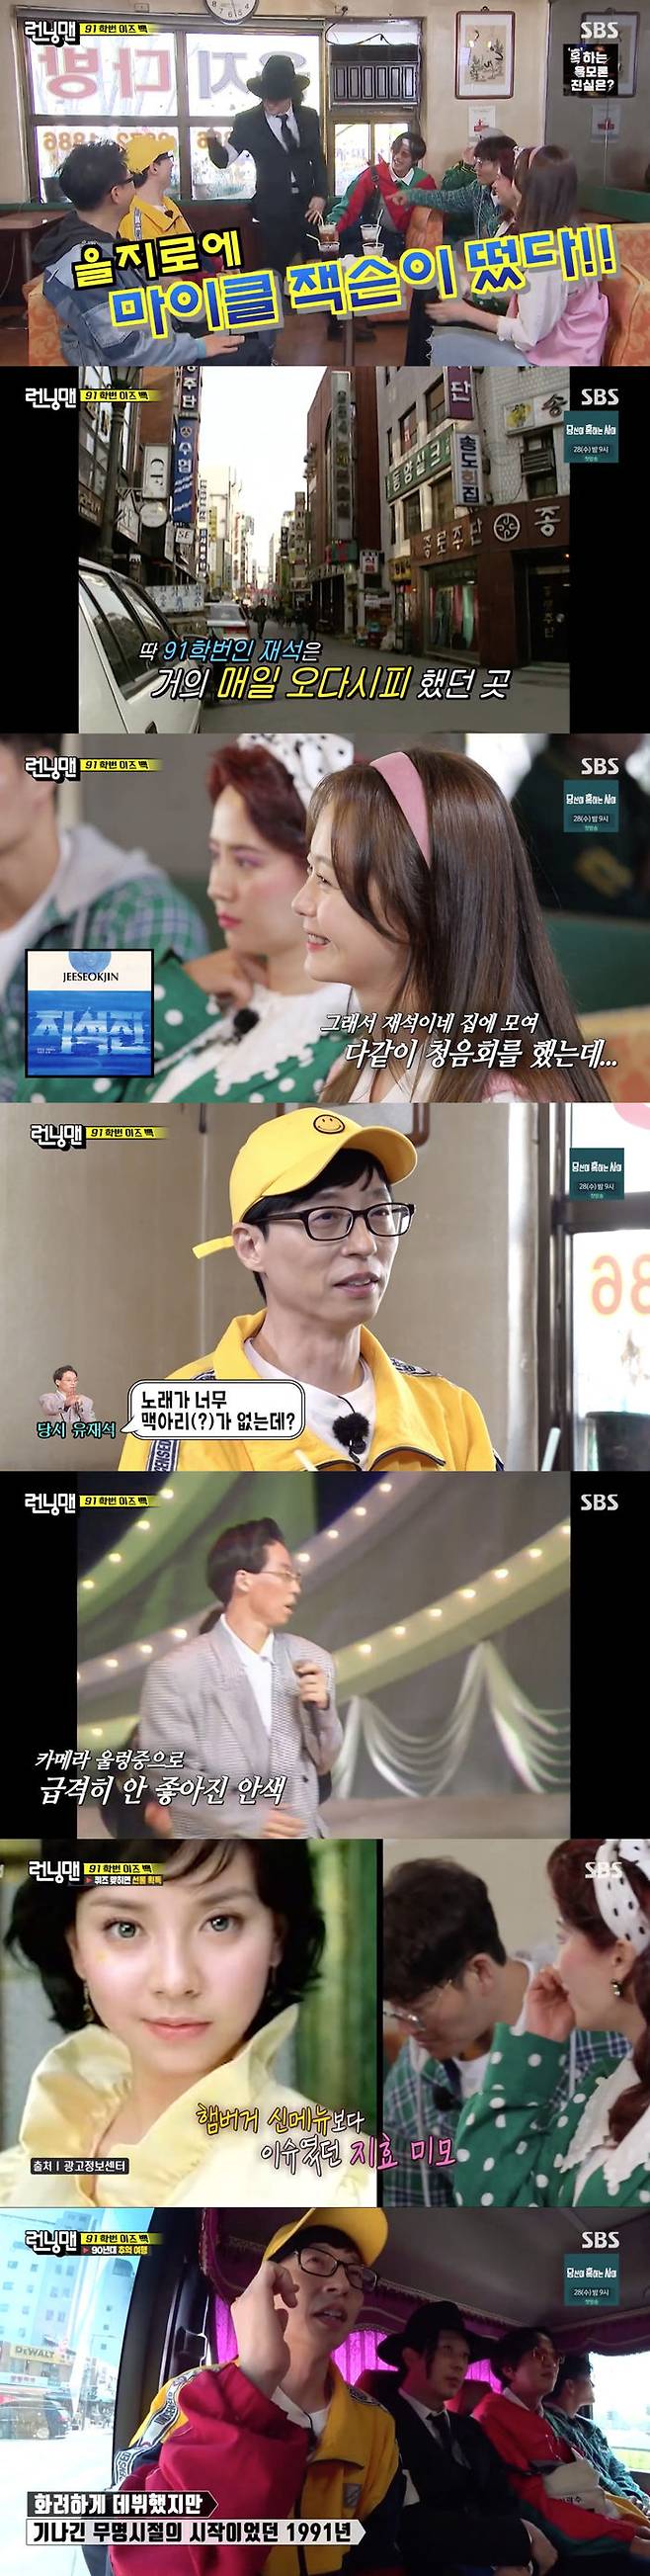 Running Man has made a memorable trip to 91.On SBS Running Man broadcasted on the 25th, 91th grade Orange Is the New Black Back Race was held.On this day, the members watched Haha, who became a concept Mia, and asked, Why are you alone?Also, Yoo Jae-Suk quipped, I think its Sangju Sangmu FC, not Michael Jackson, is it Sangju Sangmu FC?Haha showed Michael Jackson dance and disappeared the embarrassment. However, at this time, the members pointed out the boat that popped out, and Haha said, Why am I alone?Why are you wearing this, he complained of injustice.At this time, however, Yoo Jae-Suk mentioned Kim Jong-kook, who appeared in The Deacons Universal last week.I am okay with everything else, but I can not stand it because I have been in the entertainment for a long time because it is a positive accident, he said.Kim Jong-kook said, I am in 1991 and suddenly I have a recent talk. How positive I am. I am positive.Yoo Jae-Suk explained about the opening place, Euljiro, It is a place where Seoul Yedae came close when it was in Myeongdong.So, Jeon So-min said, Euljiro is hip these days.Lee Kwang-soo said, A Metro International, and said that he mistook Retro for Metro International. Lee Kwang-soo, who confirmed the mistake, resented his mouth, saying, If you do not know, you should not talk.Ji Seok-jin, who said he was 26 years old in 1991, said he was ready for his singer debut, and he said, Thy day I met Park Jae-seok.I met with Yongman as an introduction, and Park Jae-seok listened to my LP and monitored it, Yoo Jae-Suk said.I brought an LP to my house and I monitored it. Then I said, The song is too hawkish. There was no bread bursting in the chorus.The members also mentioned Michael Jackson and New Kids on the Blocks performance in the 90s.Yoo Jae-Suk recalled the time, When New Kids on the Block did the Korean War, I did a parody with fellow comedians.Haha said, I know you really danced the n. Then Yoo Jae-Suk imitated Yoo Jae-Suk. Then Yoo Jae-Suk said, Then were so nervous.The camera has become more serious with that stage. In the quiz session related to the 90s, Song Ji-hyo was disappointed that he could not catch up with the advertisement of Rberger, who was his model.The production team attracted attention by releasing the Burger advertisement video of Song Ji-hyo in the past.In a car moving for the next mission, he told Yoo Jae-Suk he didnt want to throw everything away and go back to the 90s, saying: No, never go.Youve got to lose your memory and live with that idea. Im not going. No. Kim Jong-kook said,It wasnt fun anyway?, referring to Yoo Jae-Suk, who had a hard time going through obscurity in the 90s, and Yoo Jae-Suk said frankly, It wasnt too fun.And he said, And if I go back with this mind now, I will go, so I will live a little more day by day.Yoo Jae-Suk said, I had a lot of time at that time, but how good would it be if I learned English?Then was really lying down because there was so much time. He added, And even if there was no money, I would like to see what it would have been like to invest in stocks.And Yoo Jae-Suk said, But now I think this, but after 10 or 20 years here, then I will buy stocks, and then I will also study English and regret the same.Humans always repeat the same regrets. 